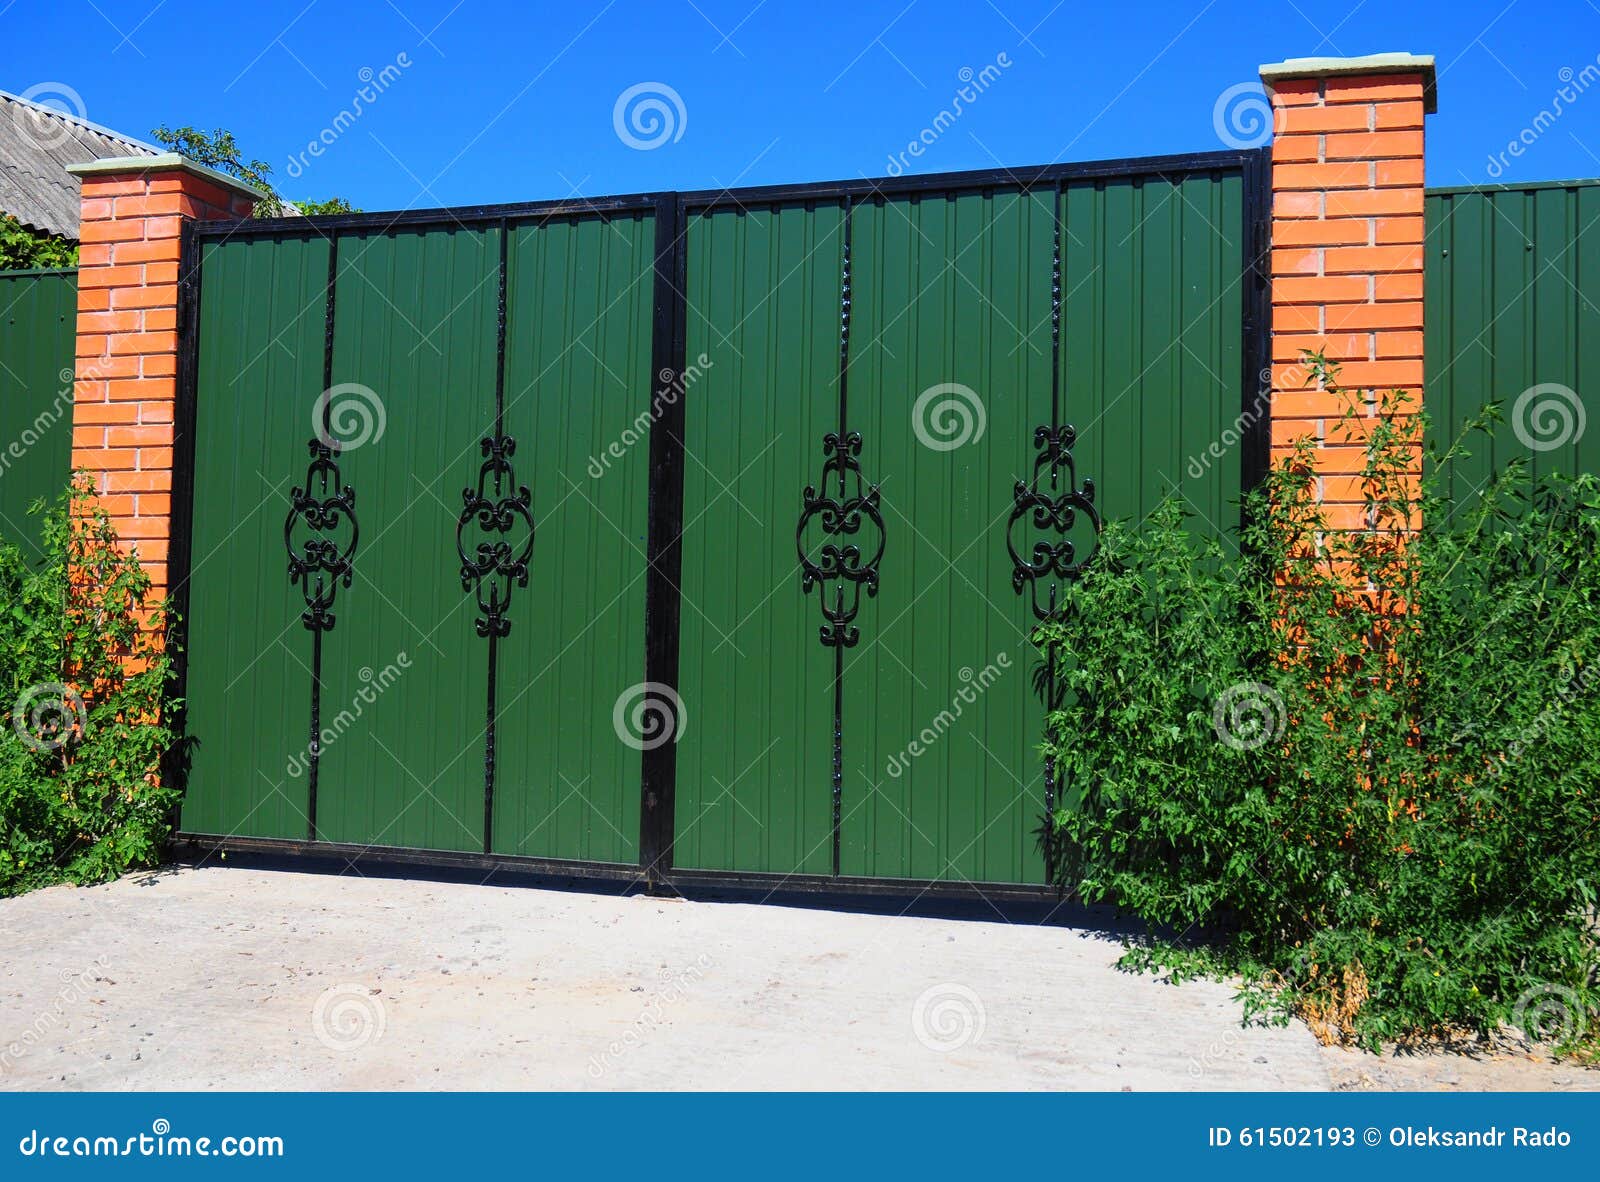 clouse up green metal profil gate with decorative gate and door in old stiletto style